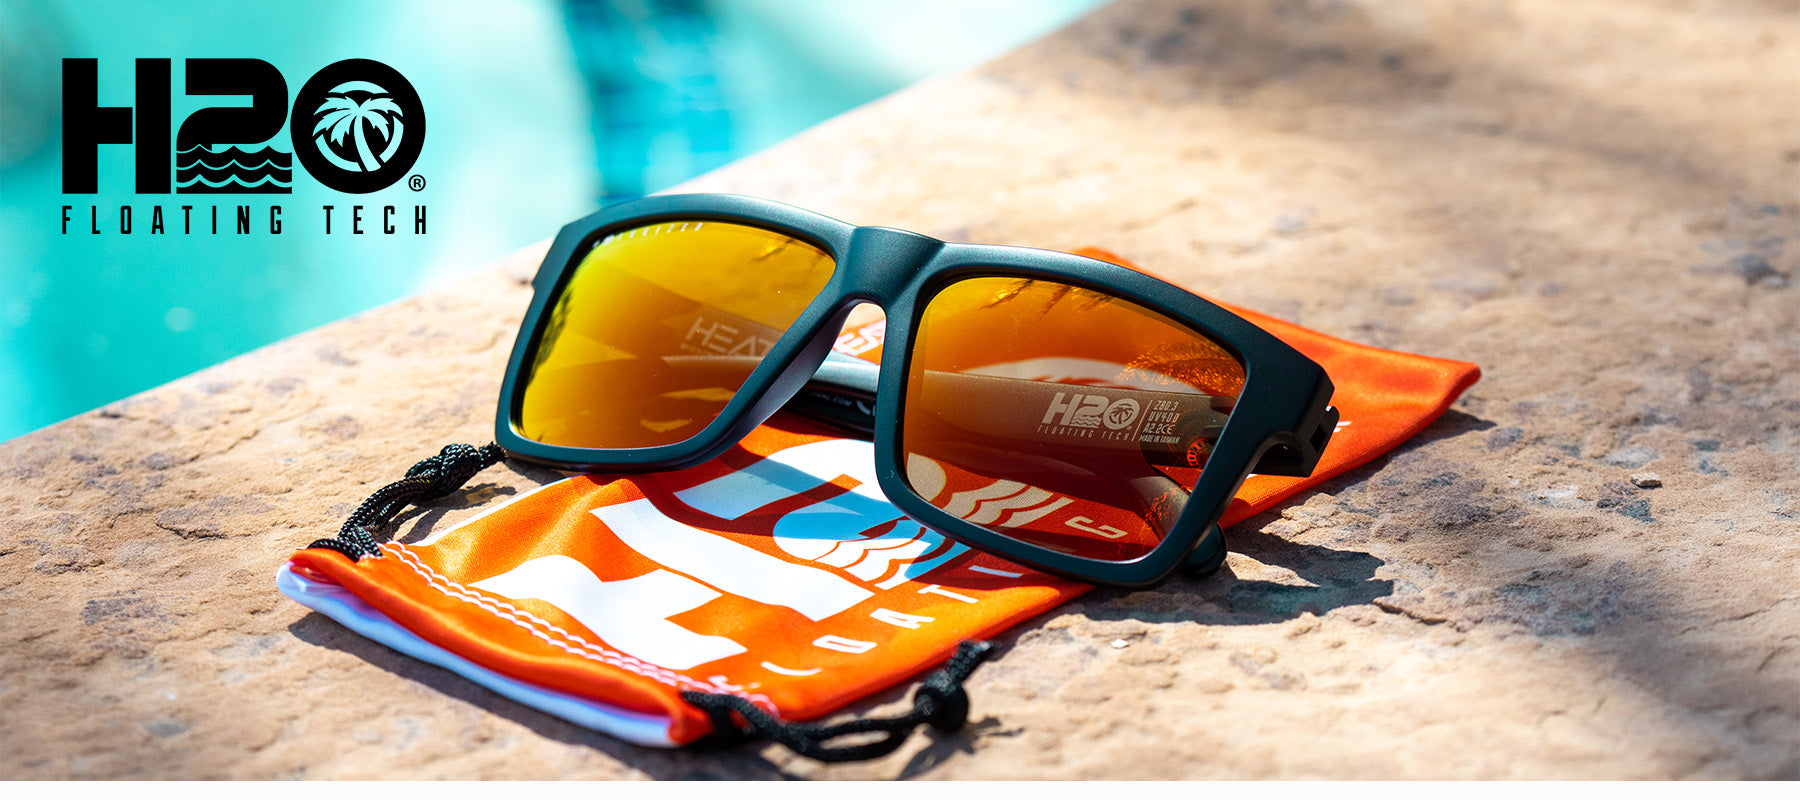 Heat Wave Visual Australia Lazer Face. Shop Online Free Same Day Shipping Australia Wide. Afterpay it. AS/NZS1337.1 Safety Glasses. H20 Floating Sunglasses. Shop Polarized Sunglasses. Heat Wave Glasses